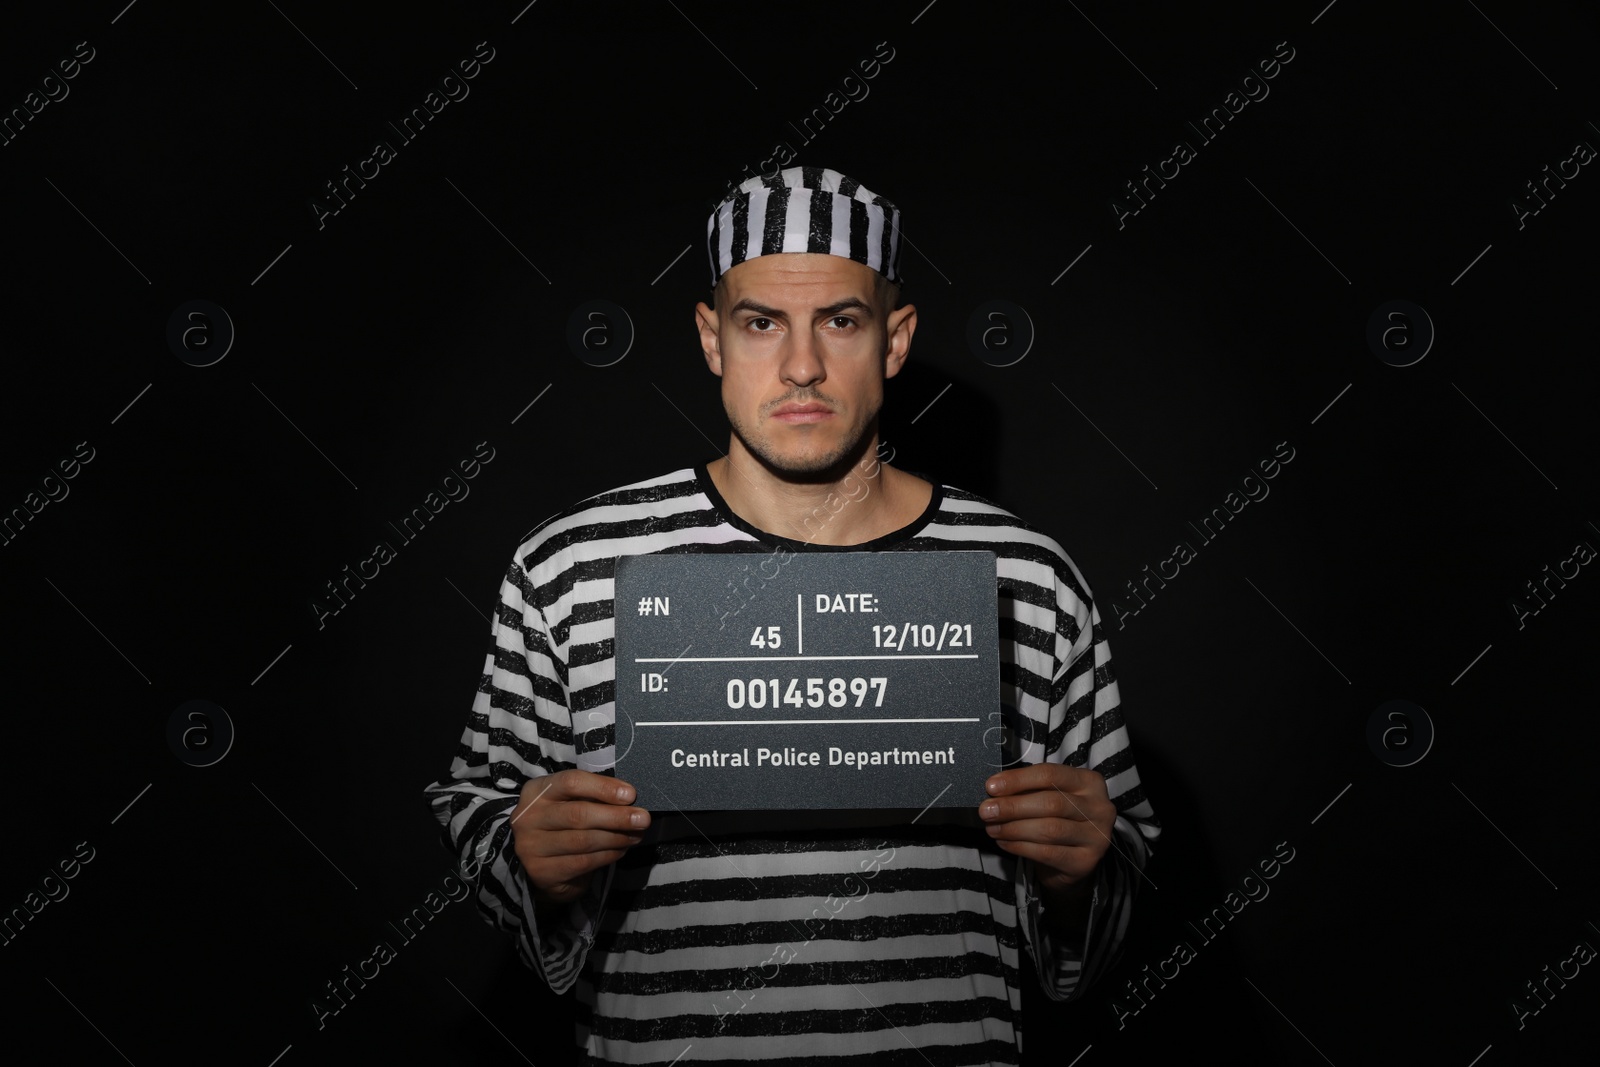 Photo of Mug shot of prisoner in striped uniform with board on black background, front view